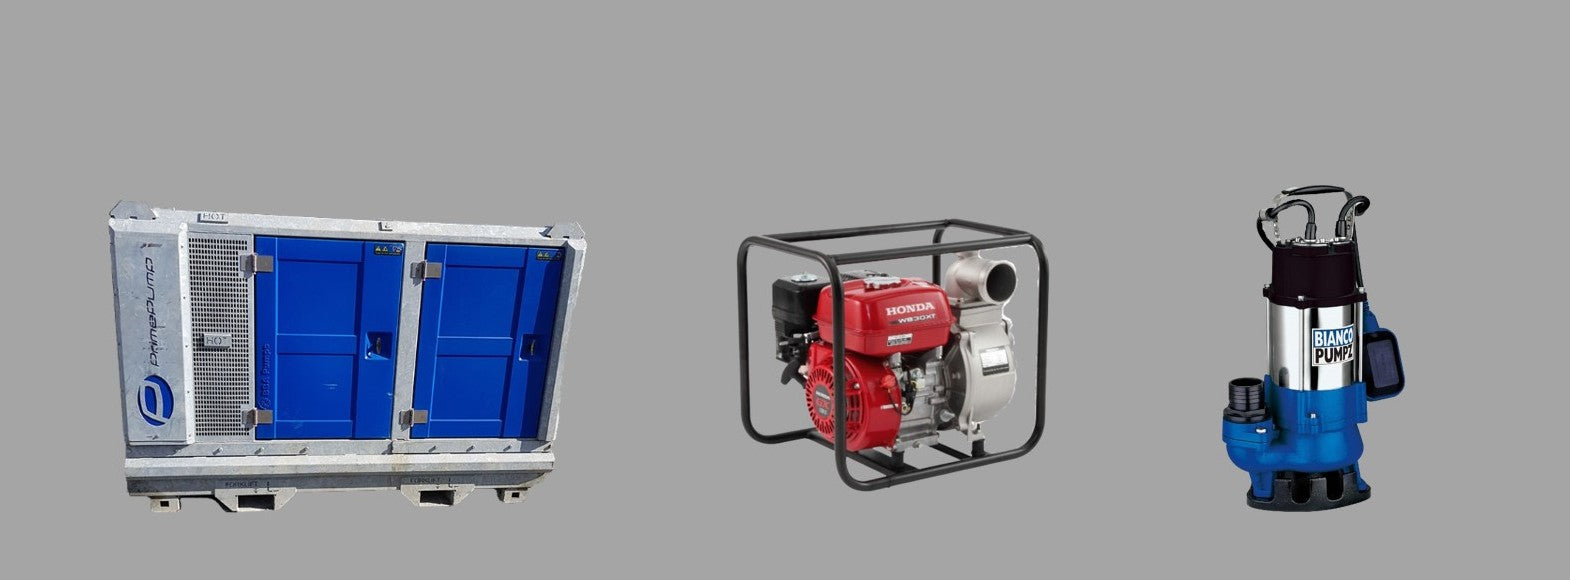 3 hire pumps on a grey background